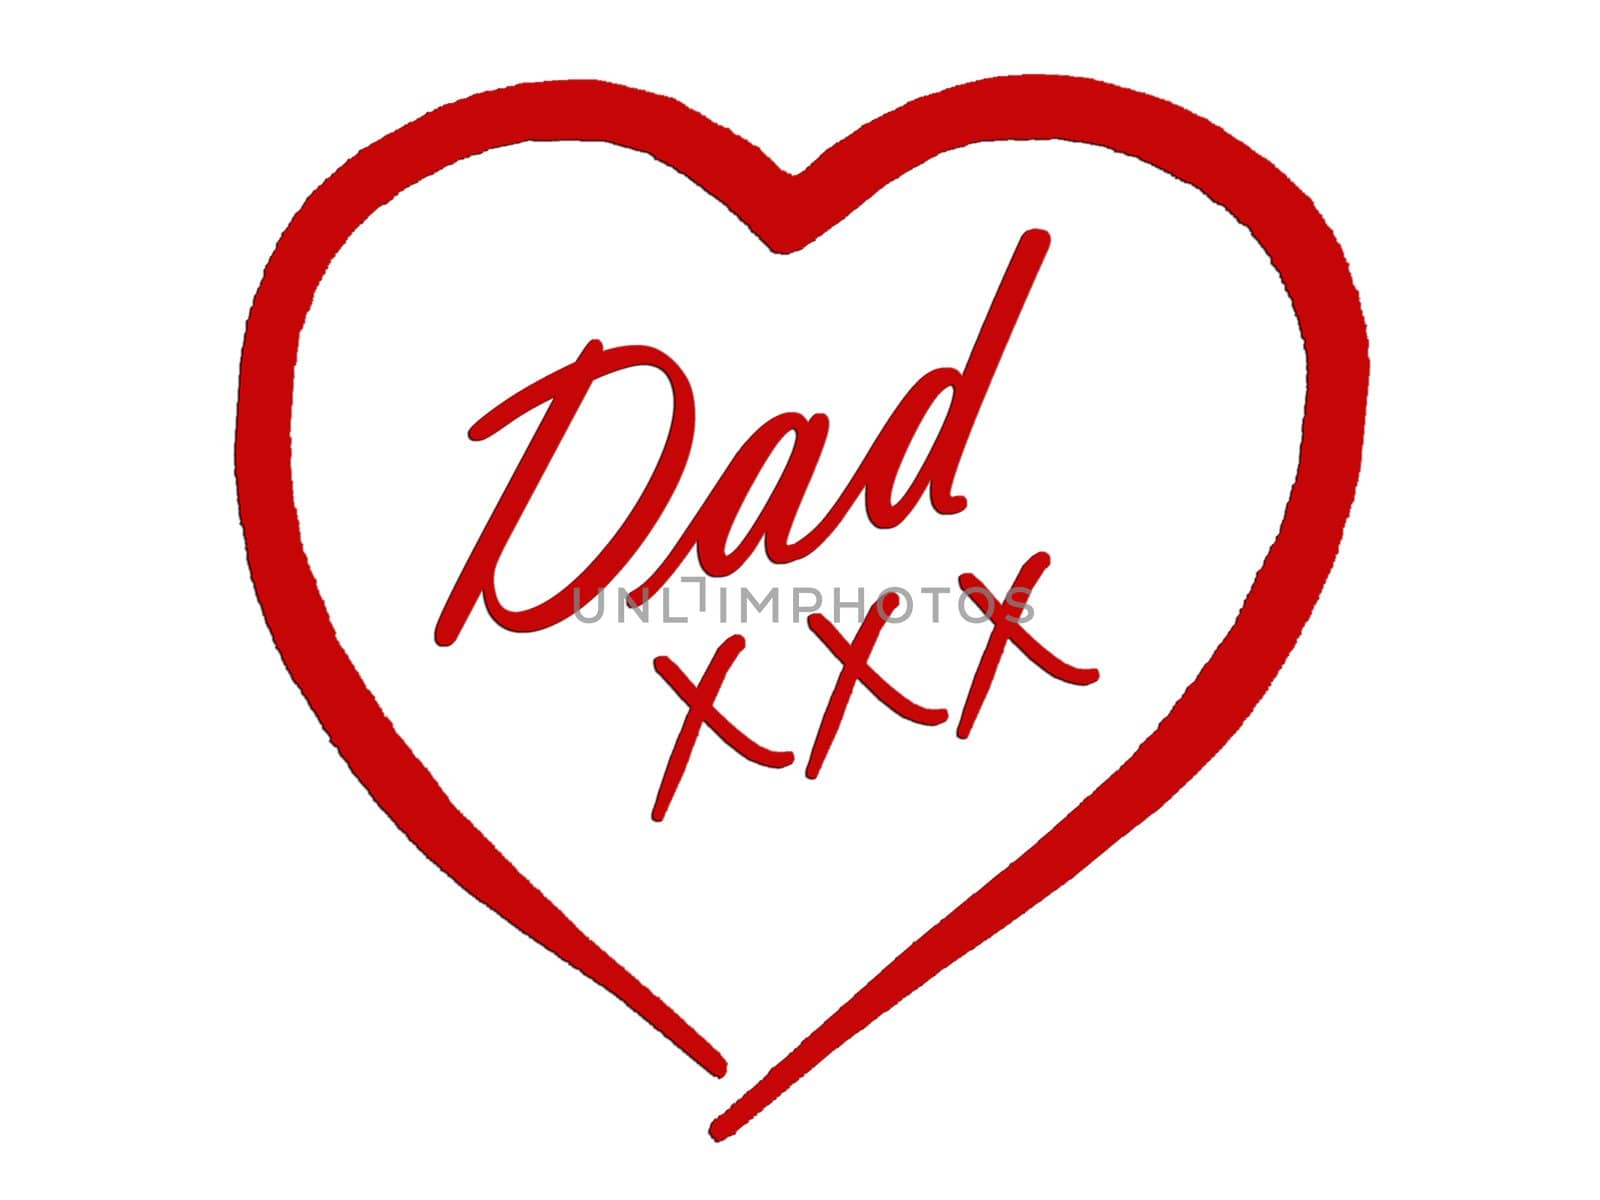 Father's Day card with Dad in a red heart
, isolated on a white background